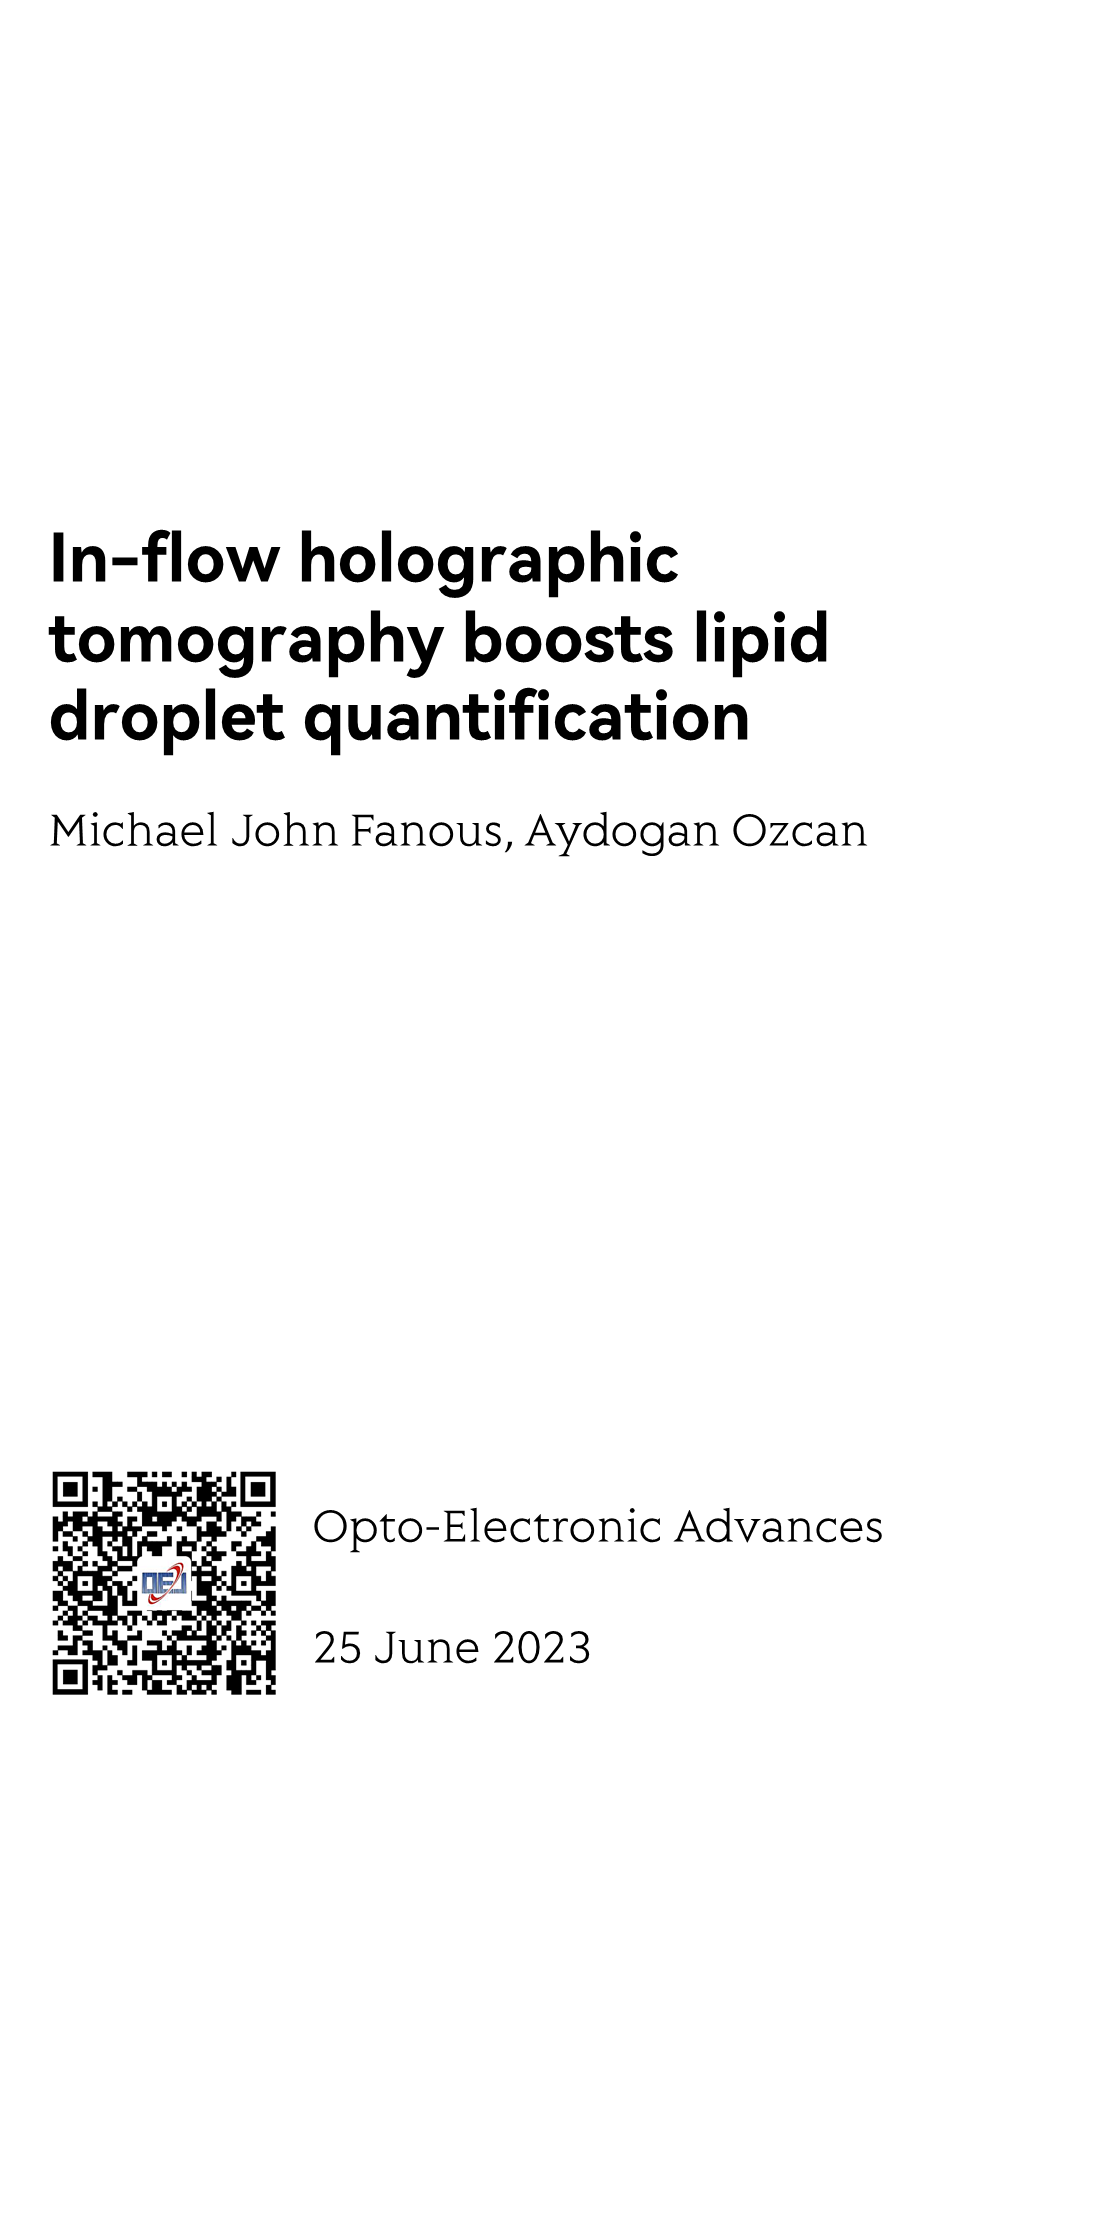 In-flow holographic tomography boosts lipid droplet quantification_1